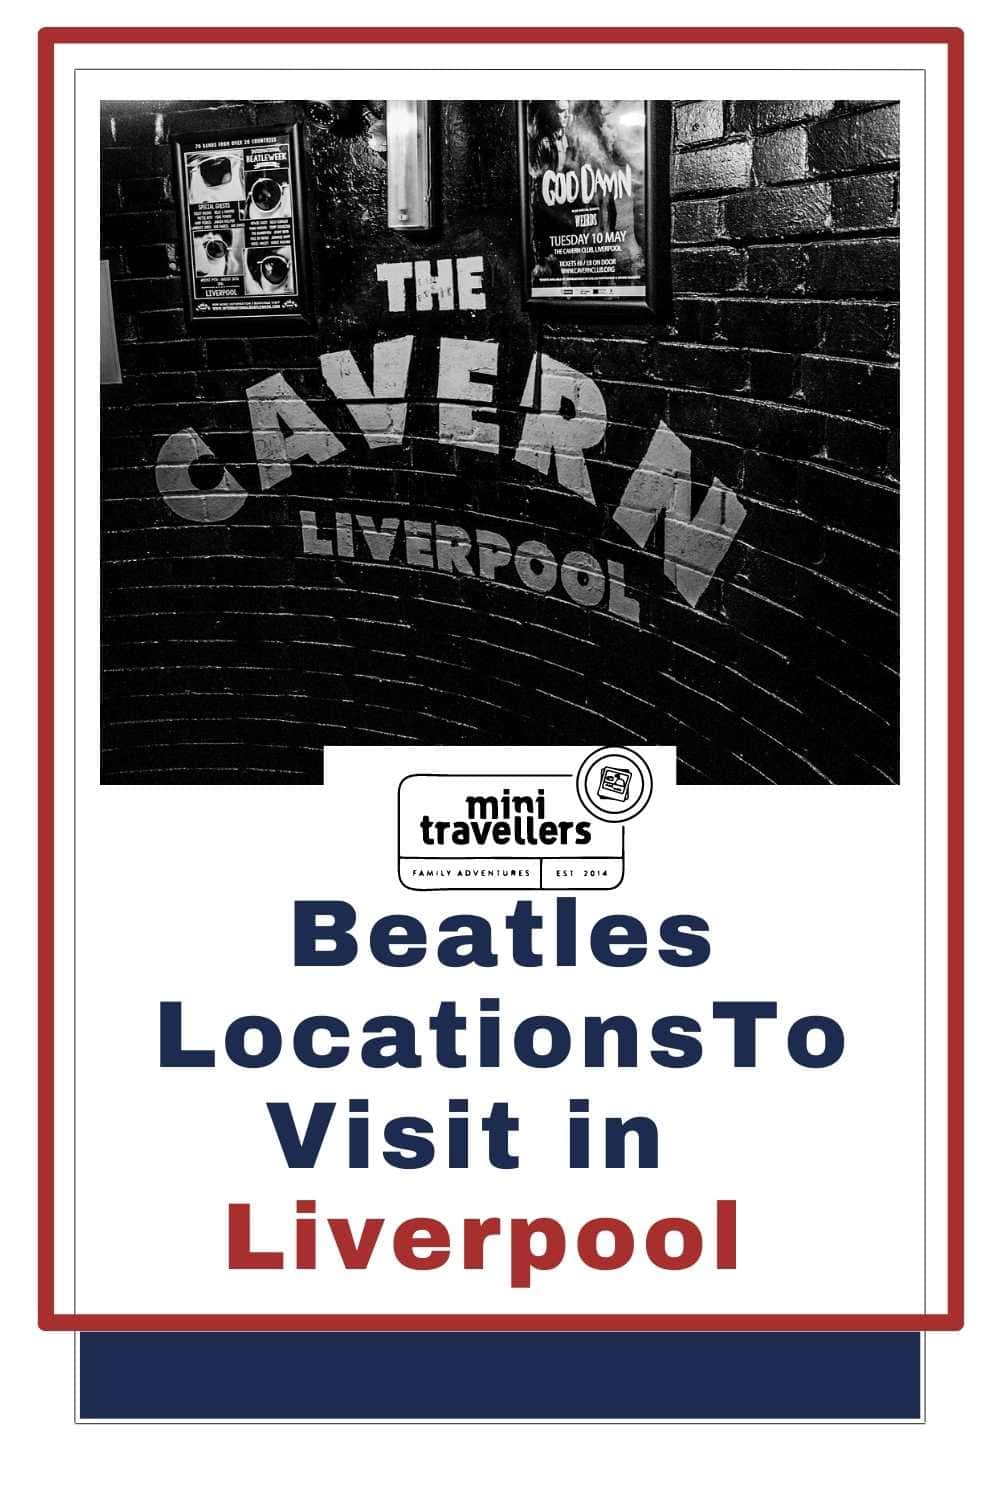 Top Beatles Locations To Visit In Liverpool, where to go to walk in the footsteps of John, Paul, George and Ringo 